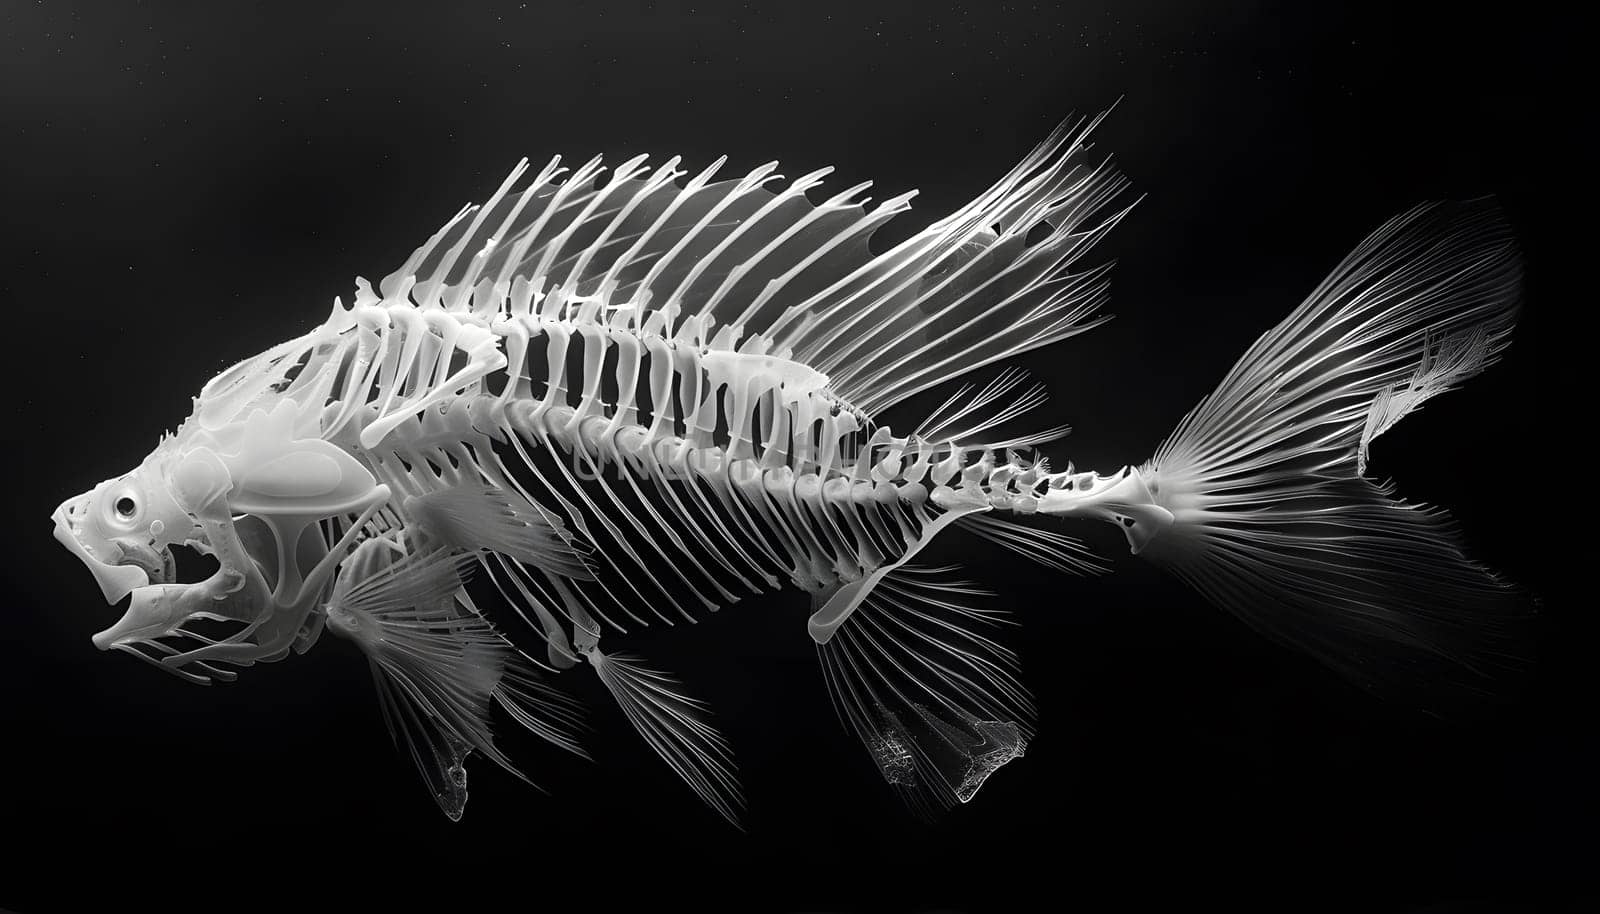 Monochrome photo shows fish skeleton with electric blue fins and tail by Nadtochiy